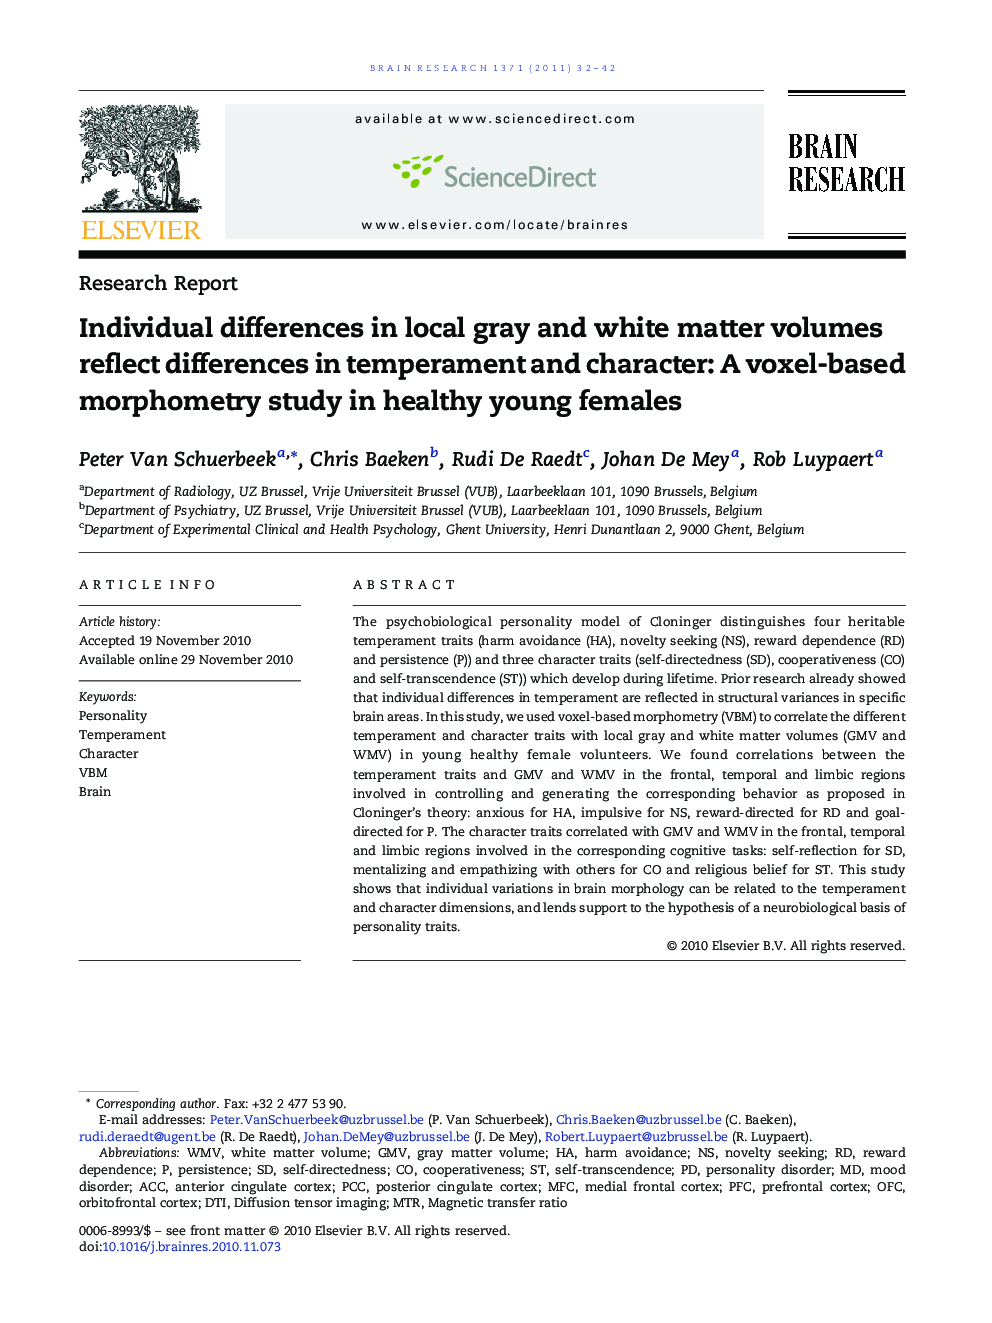 Research ReportIndividual differences in local gray and white matter volumes reflect differences in temperament and character: A voxel-based morphometry study in healthy young females